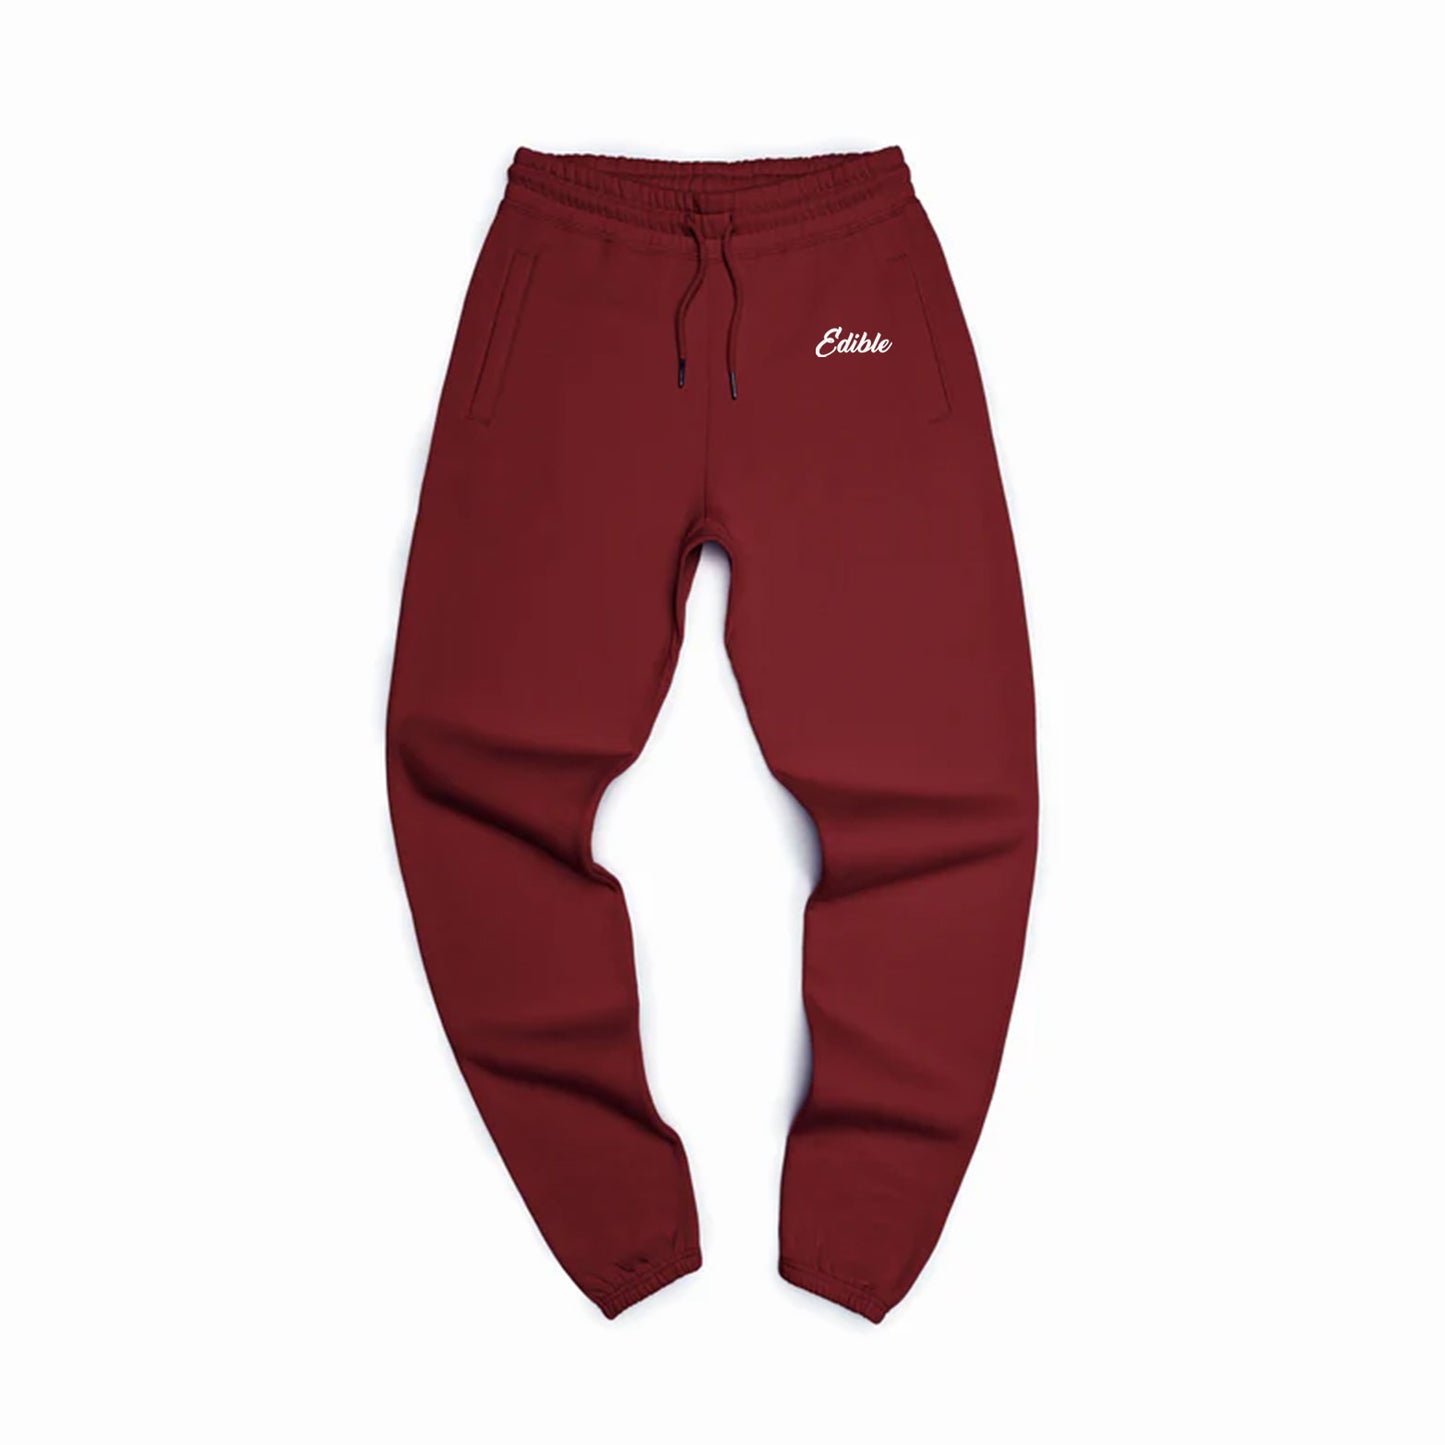 "Edible" Embroidered Sweatpants